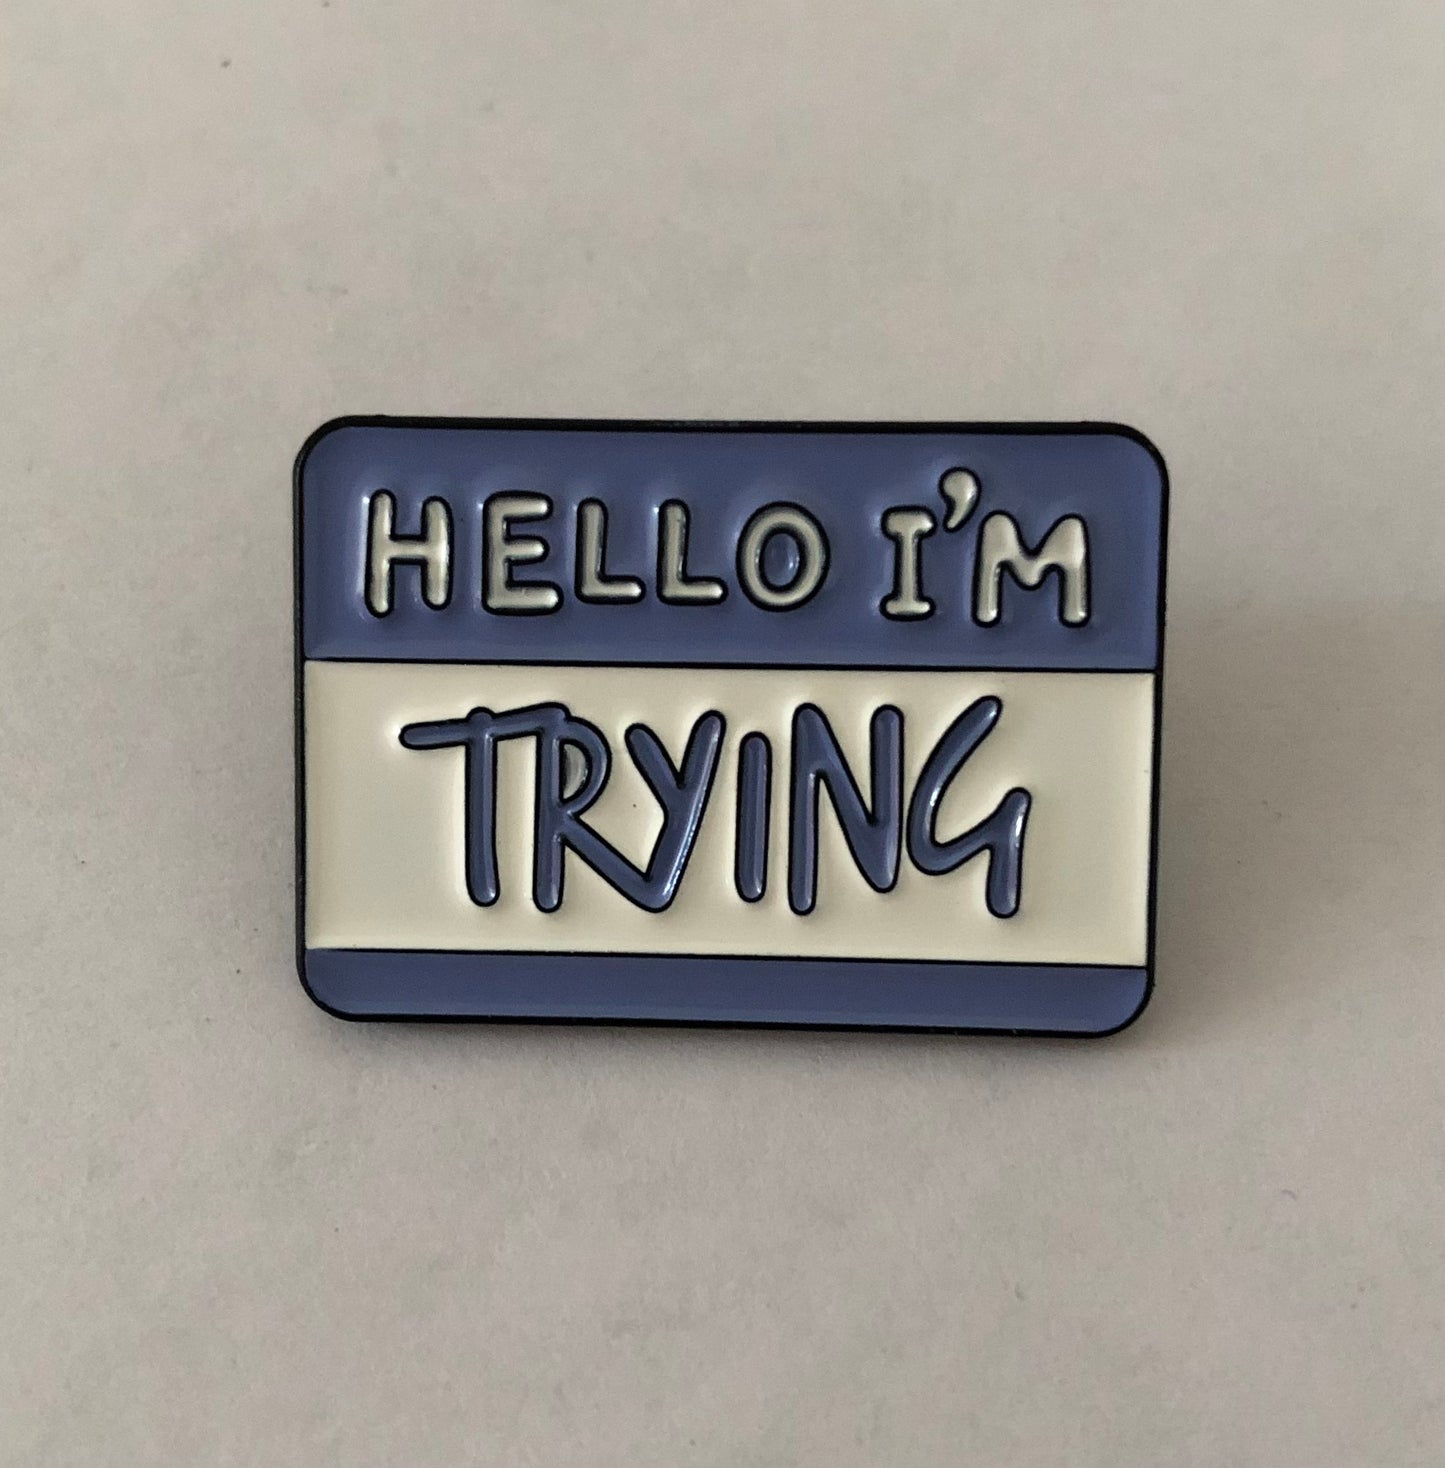 Hello I’m trying pin